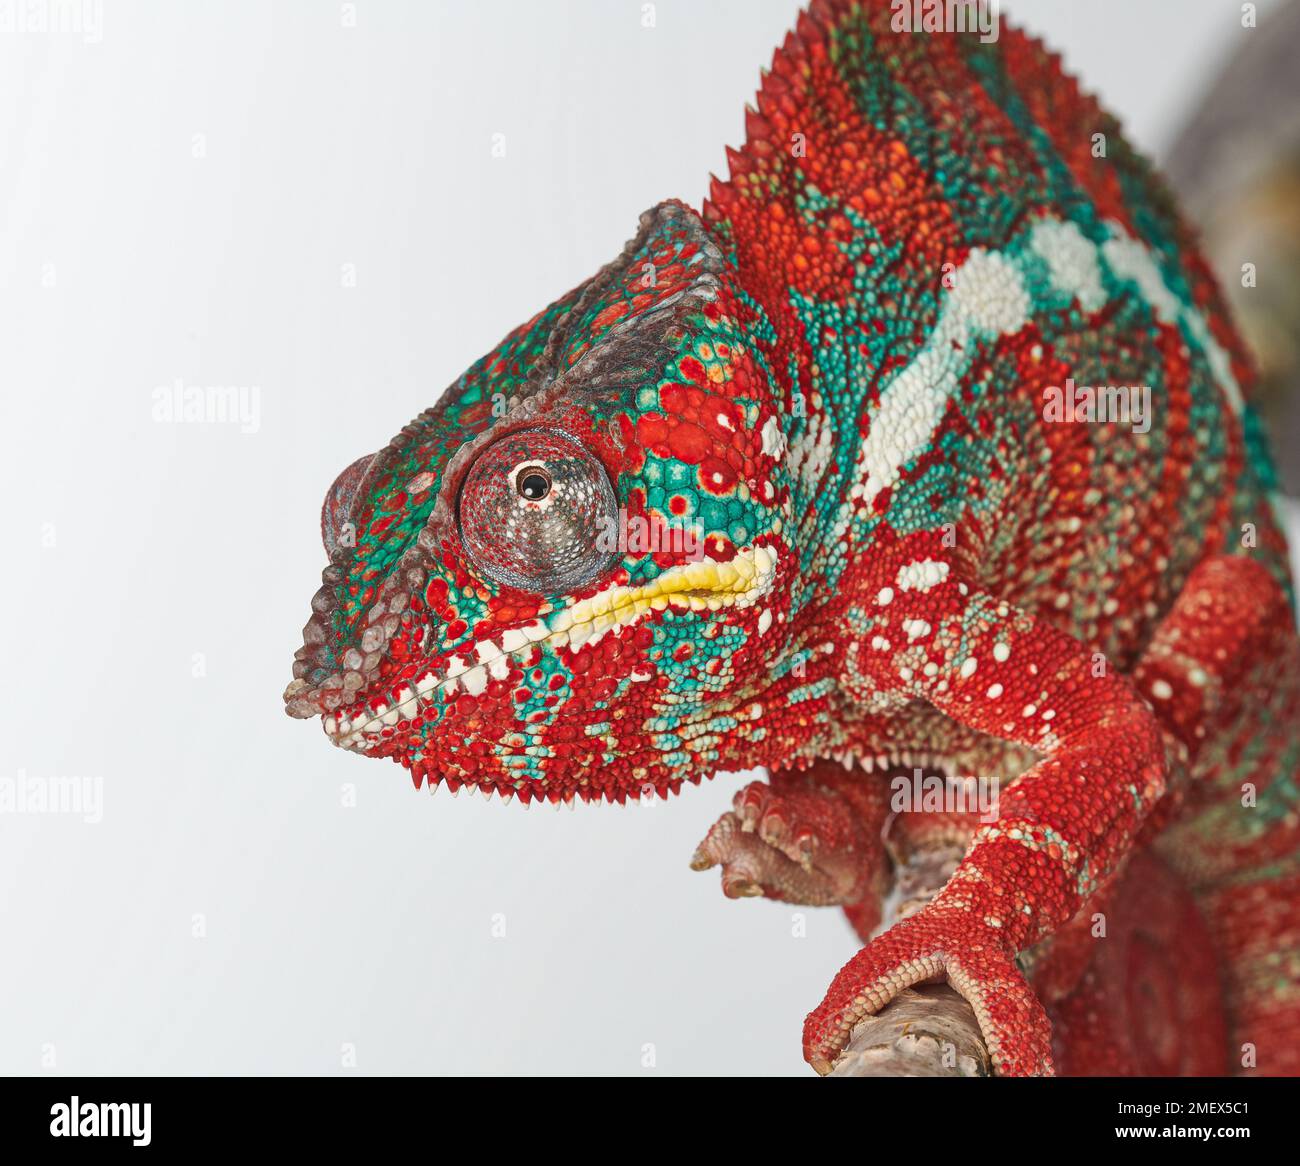 Panther chameleon, Furcifer pardalis, head close-up with independently swivelling eyes Stock Photo